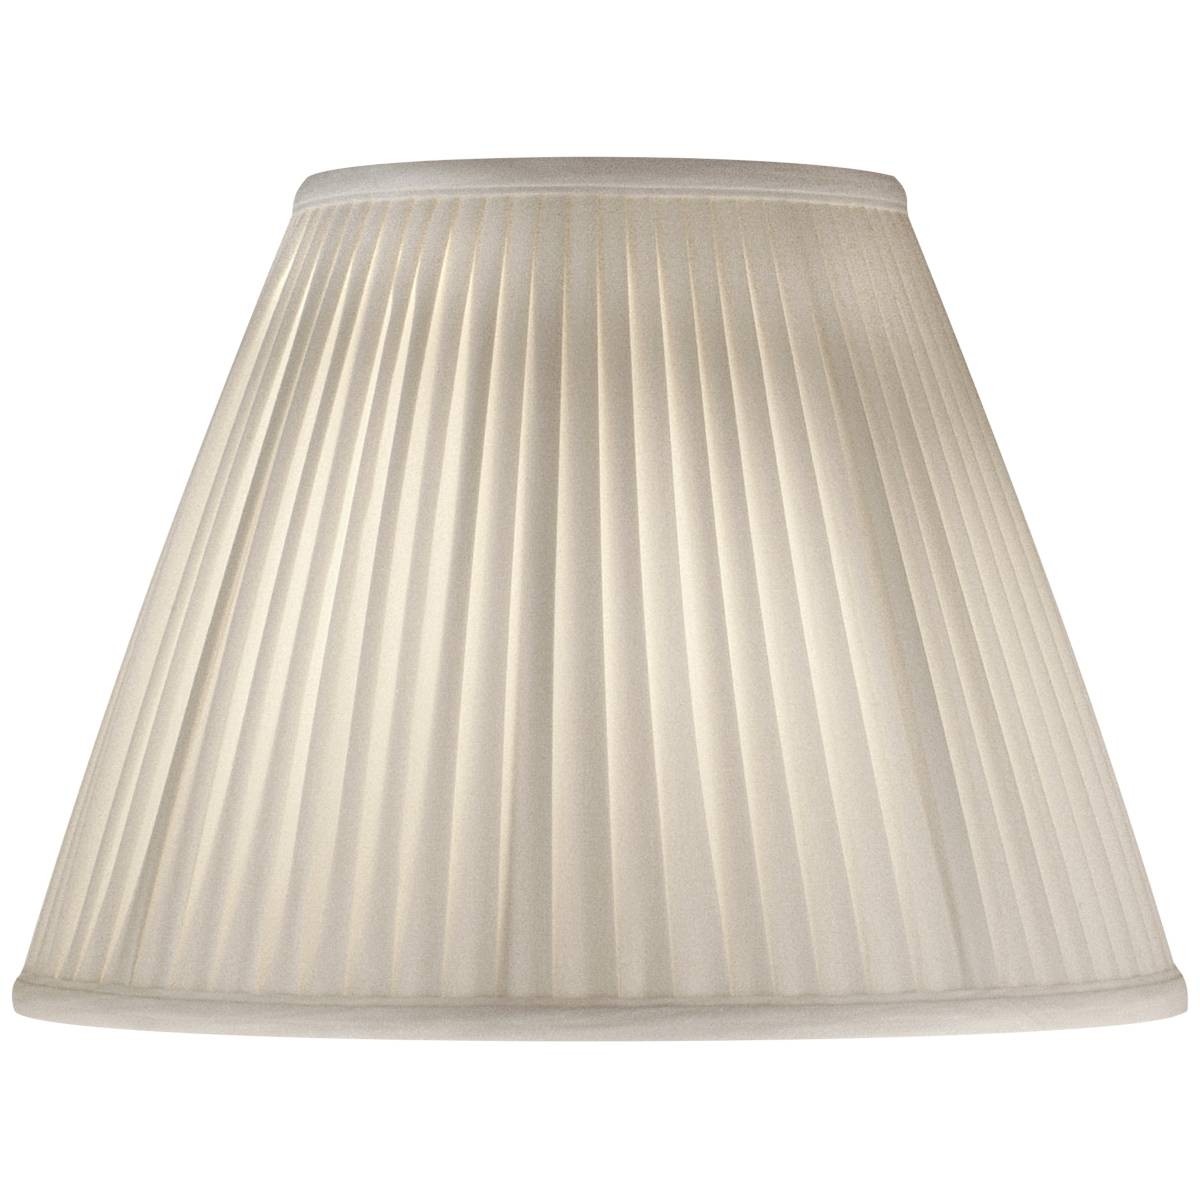 13 in to 16 in stiffel lamp shades lamps plus